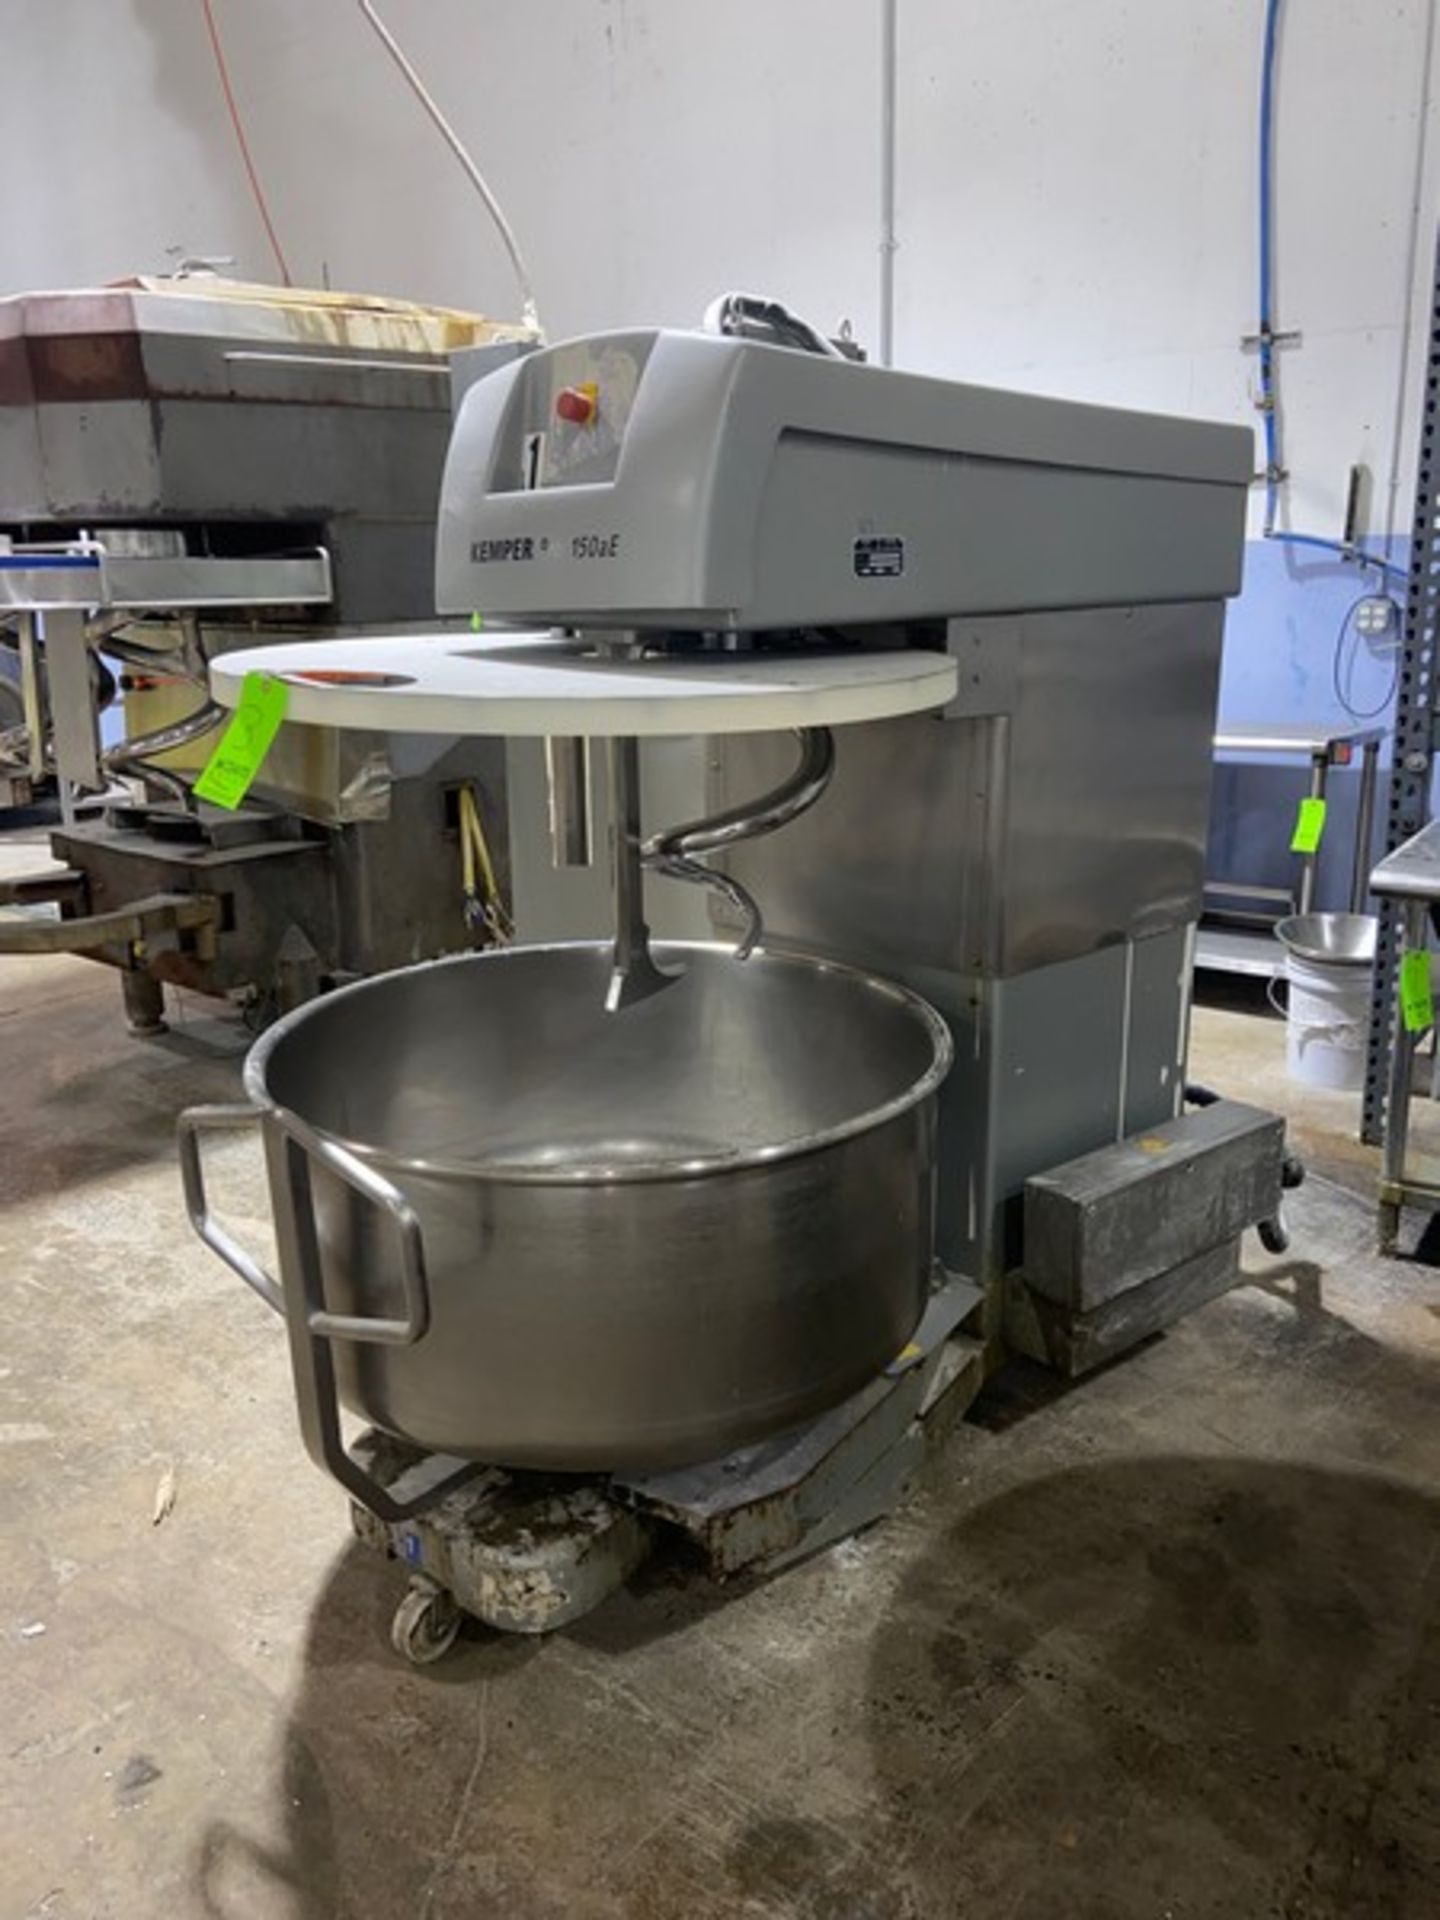 Kemper S/S Dough Mixer, Type: PRO 150 ASPS, Date-Code: J3A-98141/629027, 480 Volts, 3 Phase, with